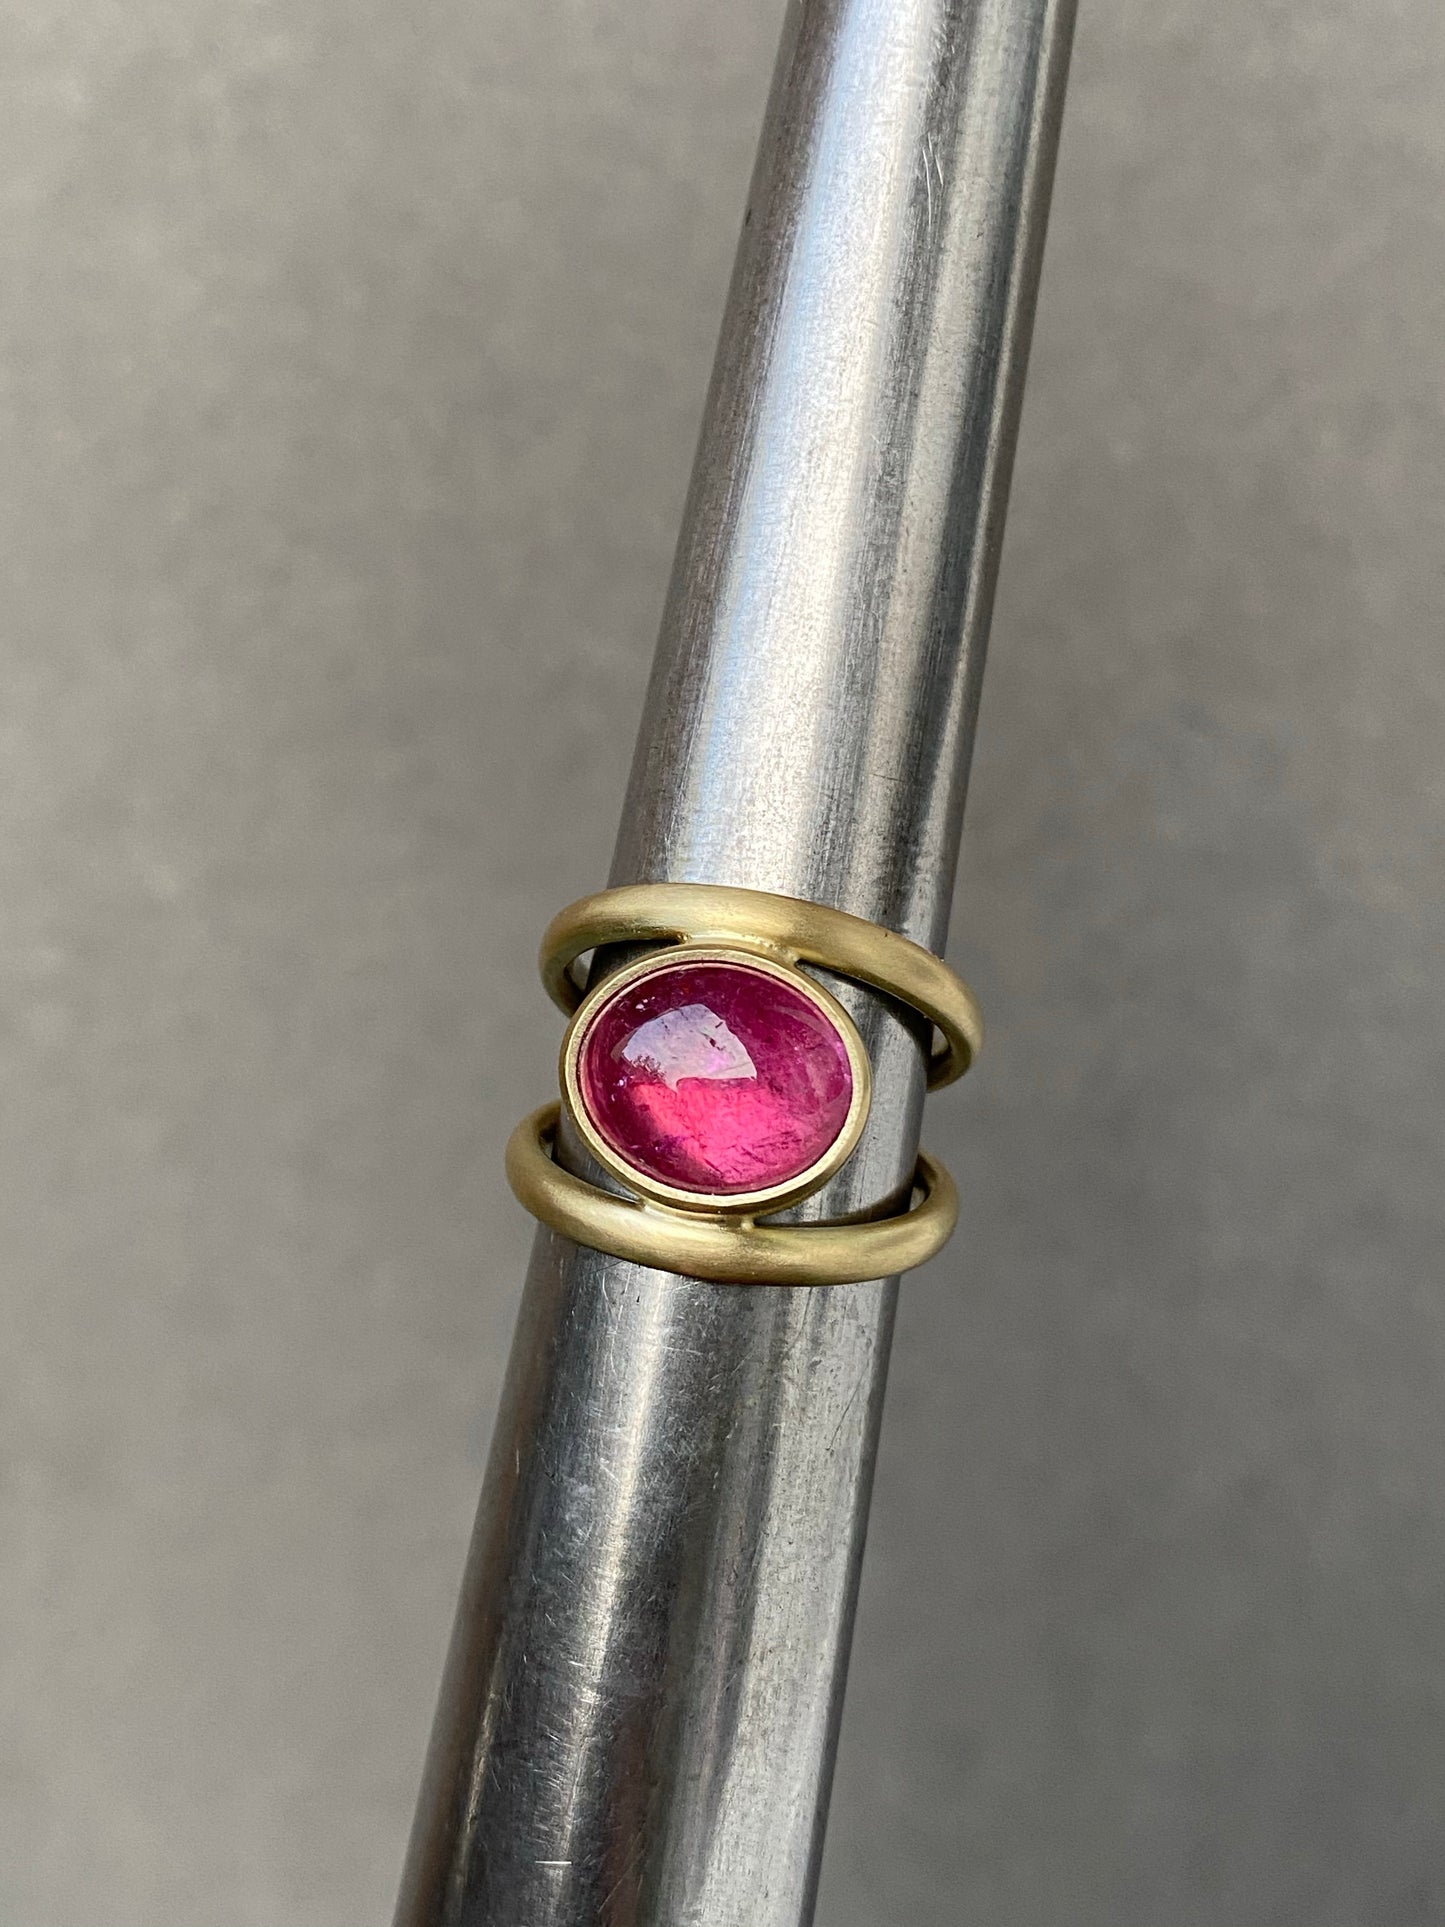 14k yellow gold ring set with a pink tourmaline